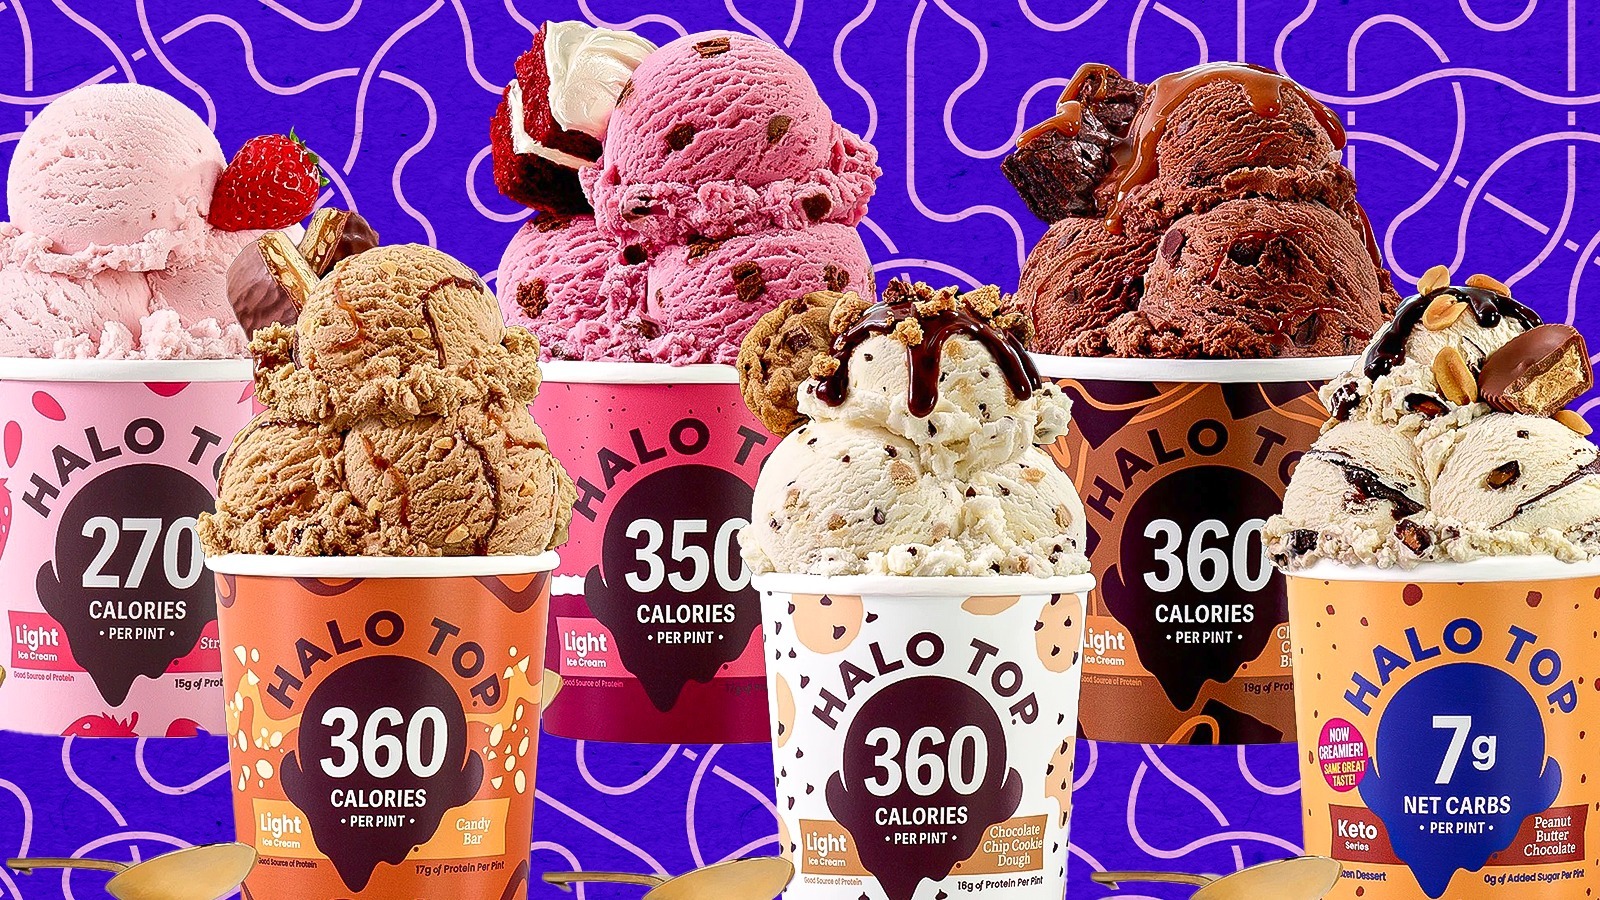 12 Of The Unhealthiest Halo Top Flavors